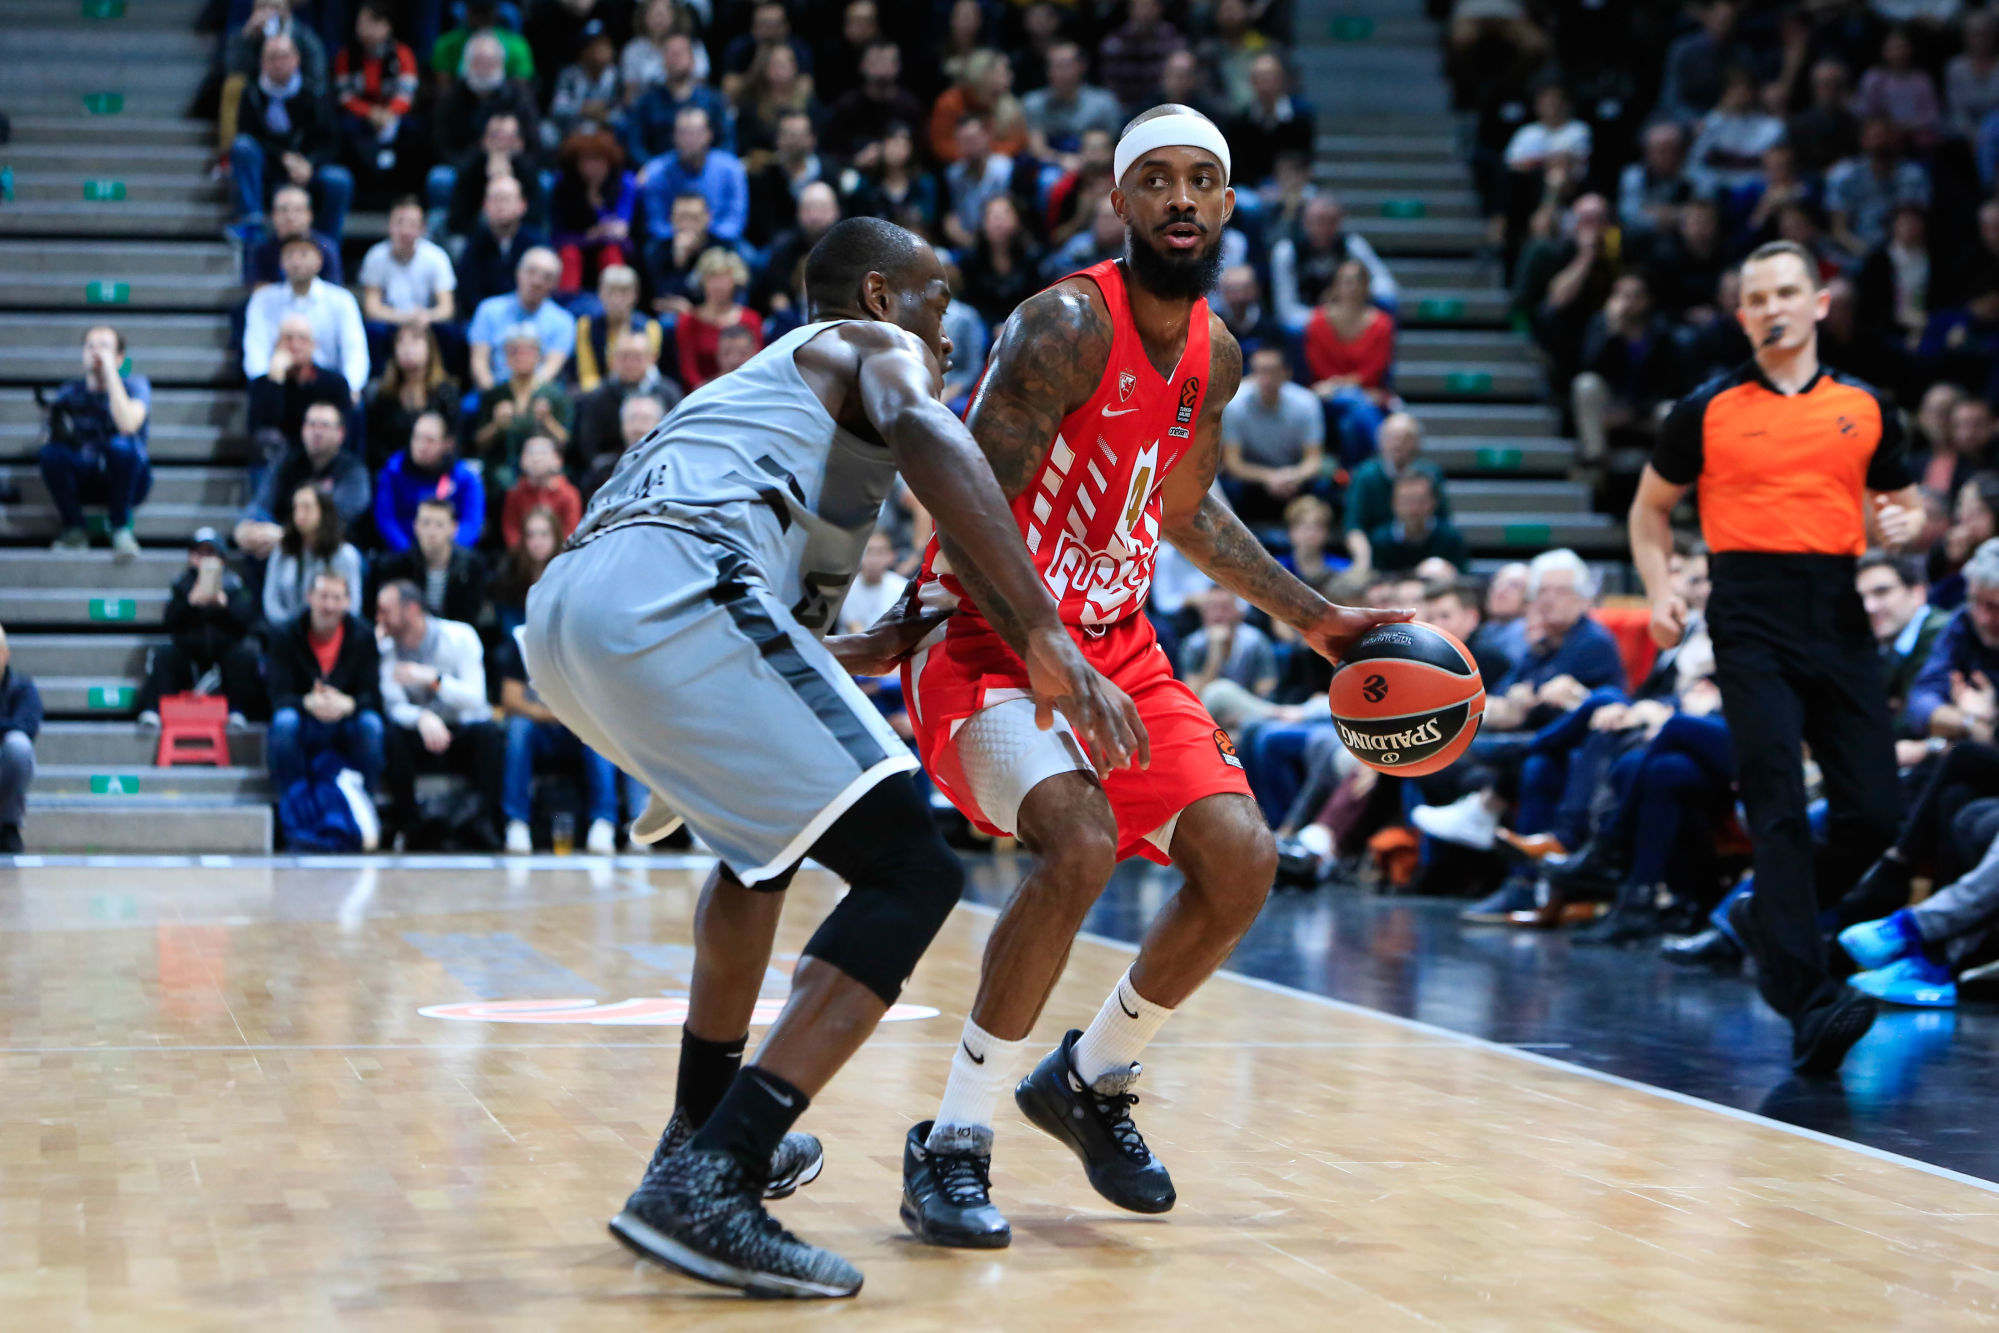 Lorenzo BROWN of Belgrade and Charles KAHUDI of Lyon during the Euroleague match between ASVEL and Crvena zvezda on January 10, 2020 in Villeurbanne, France. (Photo by Romain Biard/Icon Sport) - Astroballe - Villeurbanne (France)